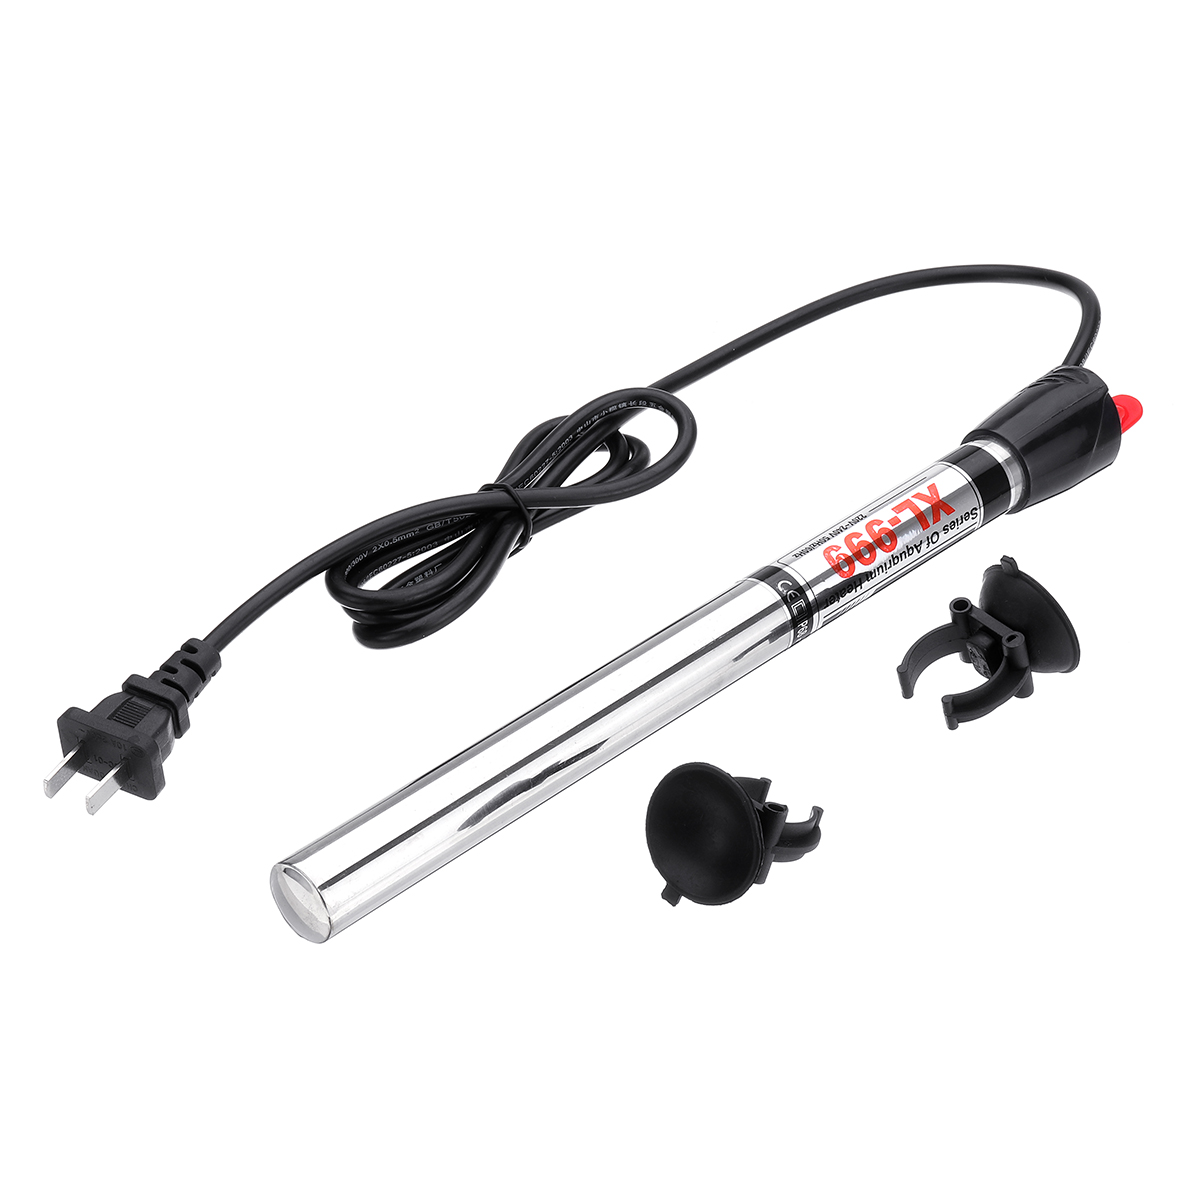 100W200W-Submersible-Stainless-Steel-Water-Heater-Rod-Aquarium-Fish-Tank-220V-1478945-1